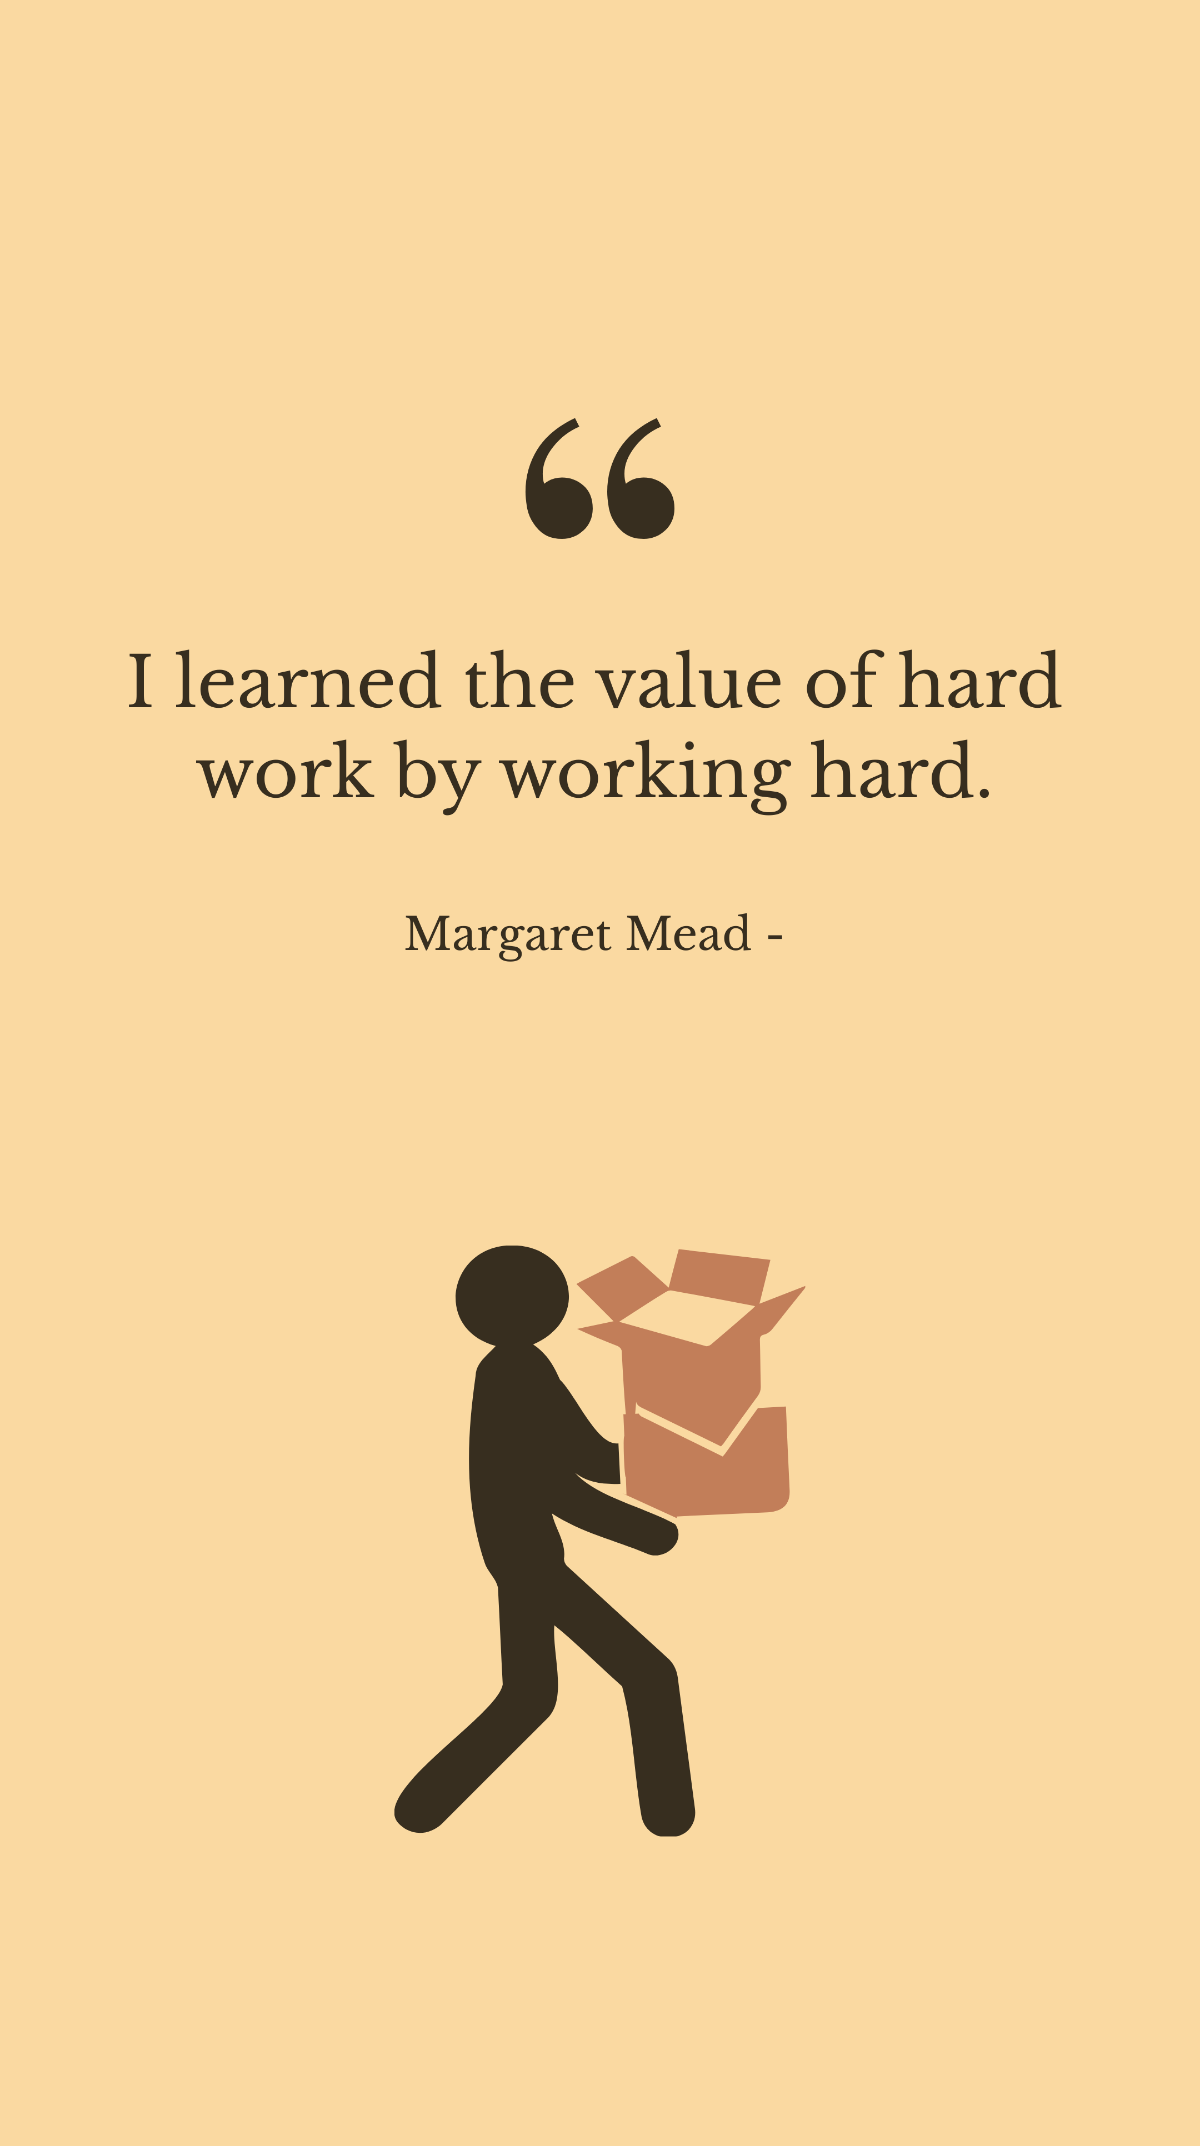 Margaret Mead - I learned the value of hard work by working hard.